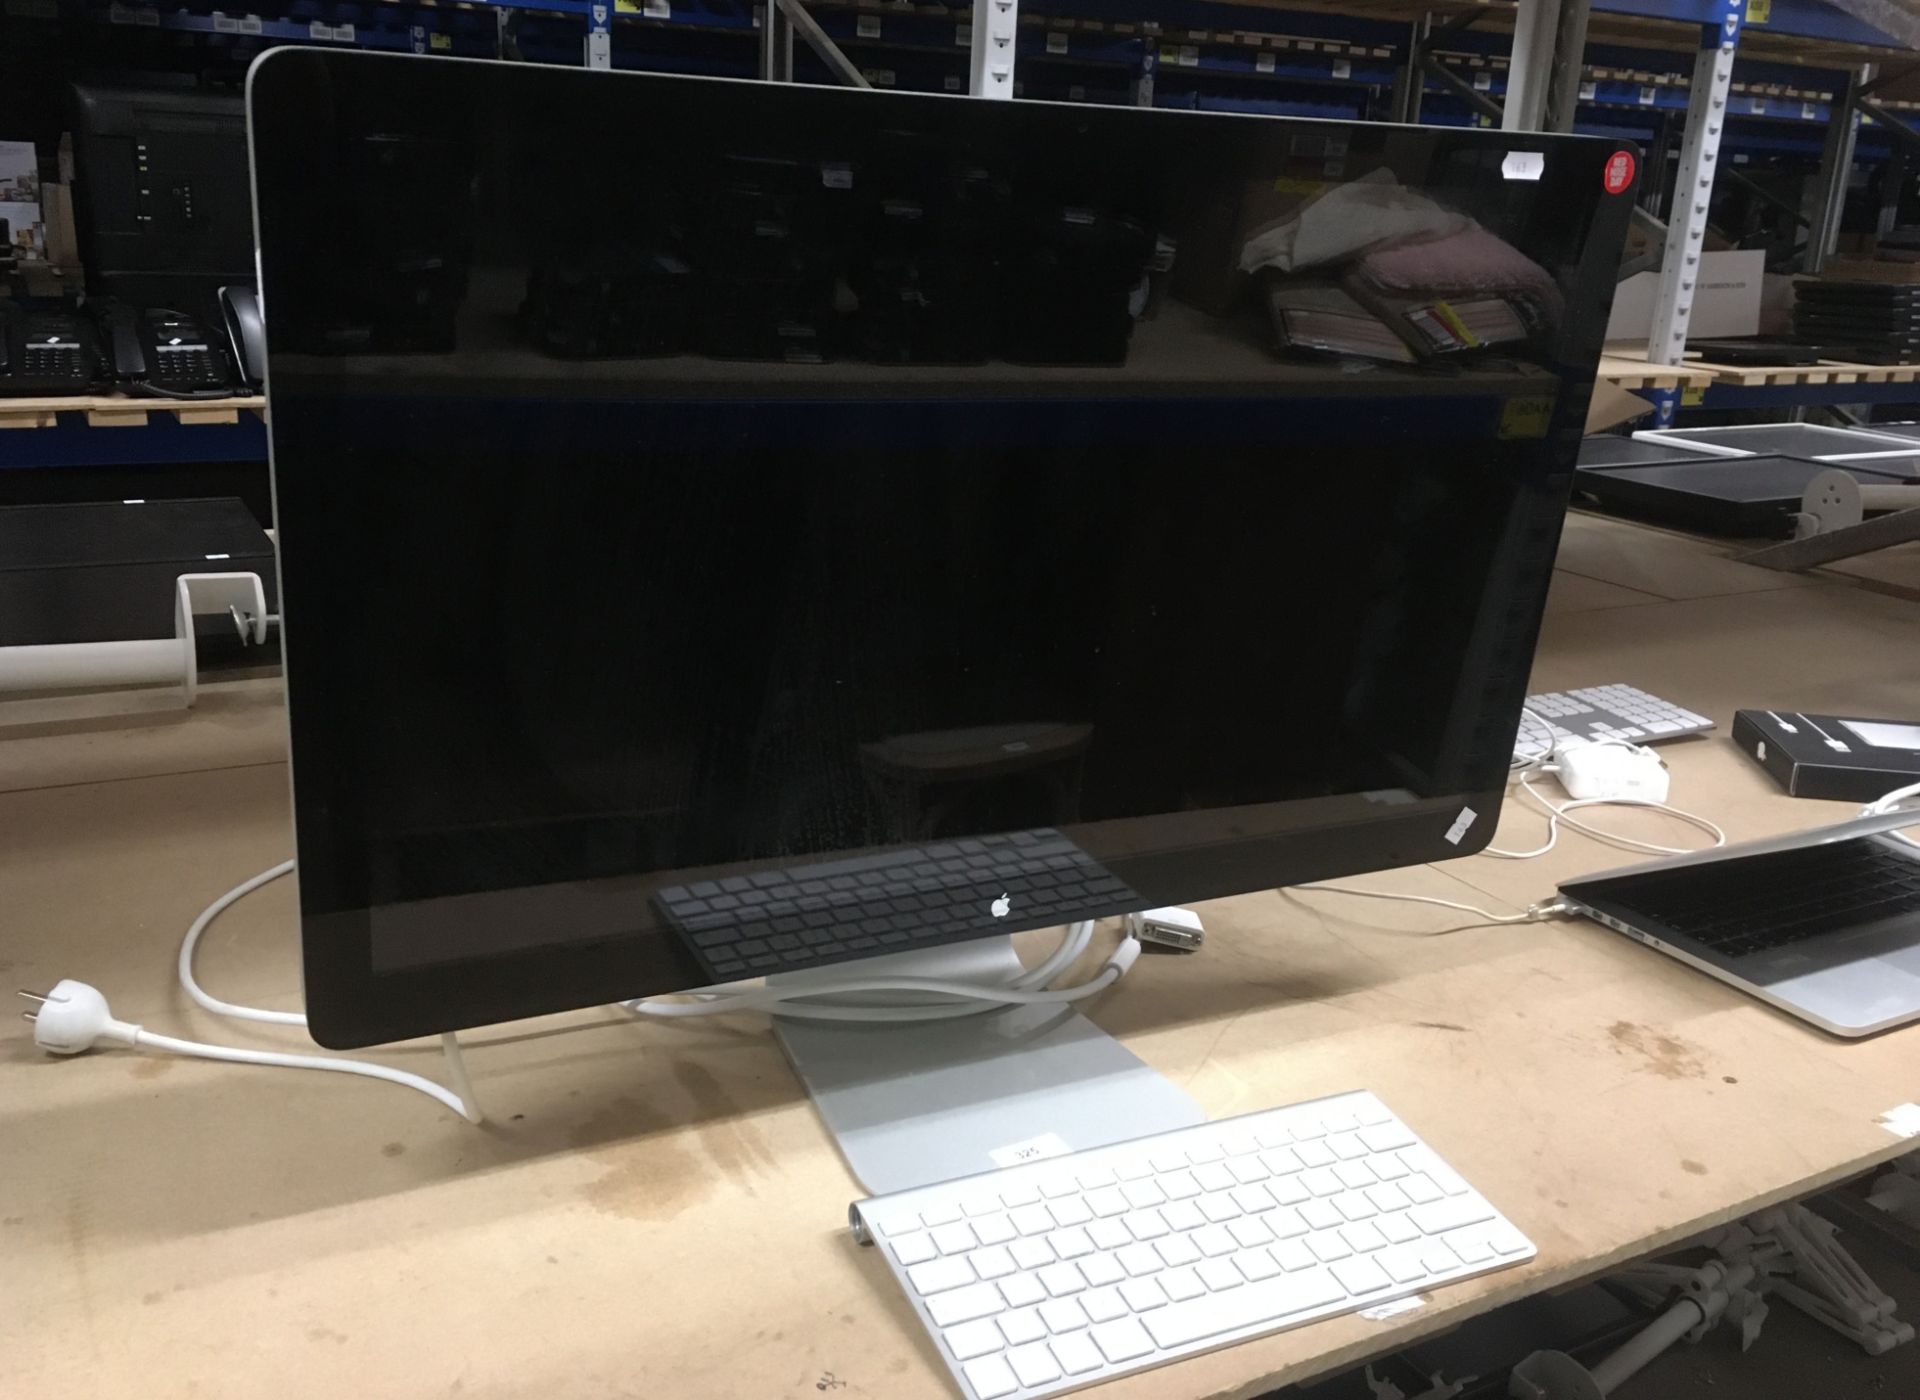 Apple Mac Pro A1407 monitor complete with wireless keyboard